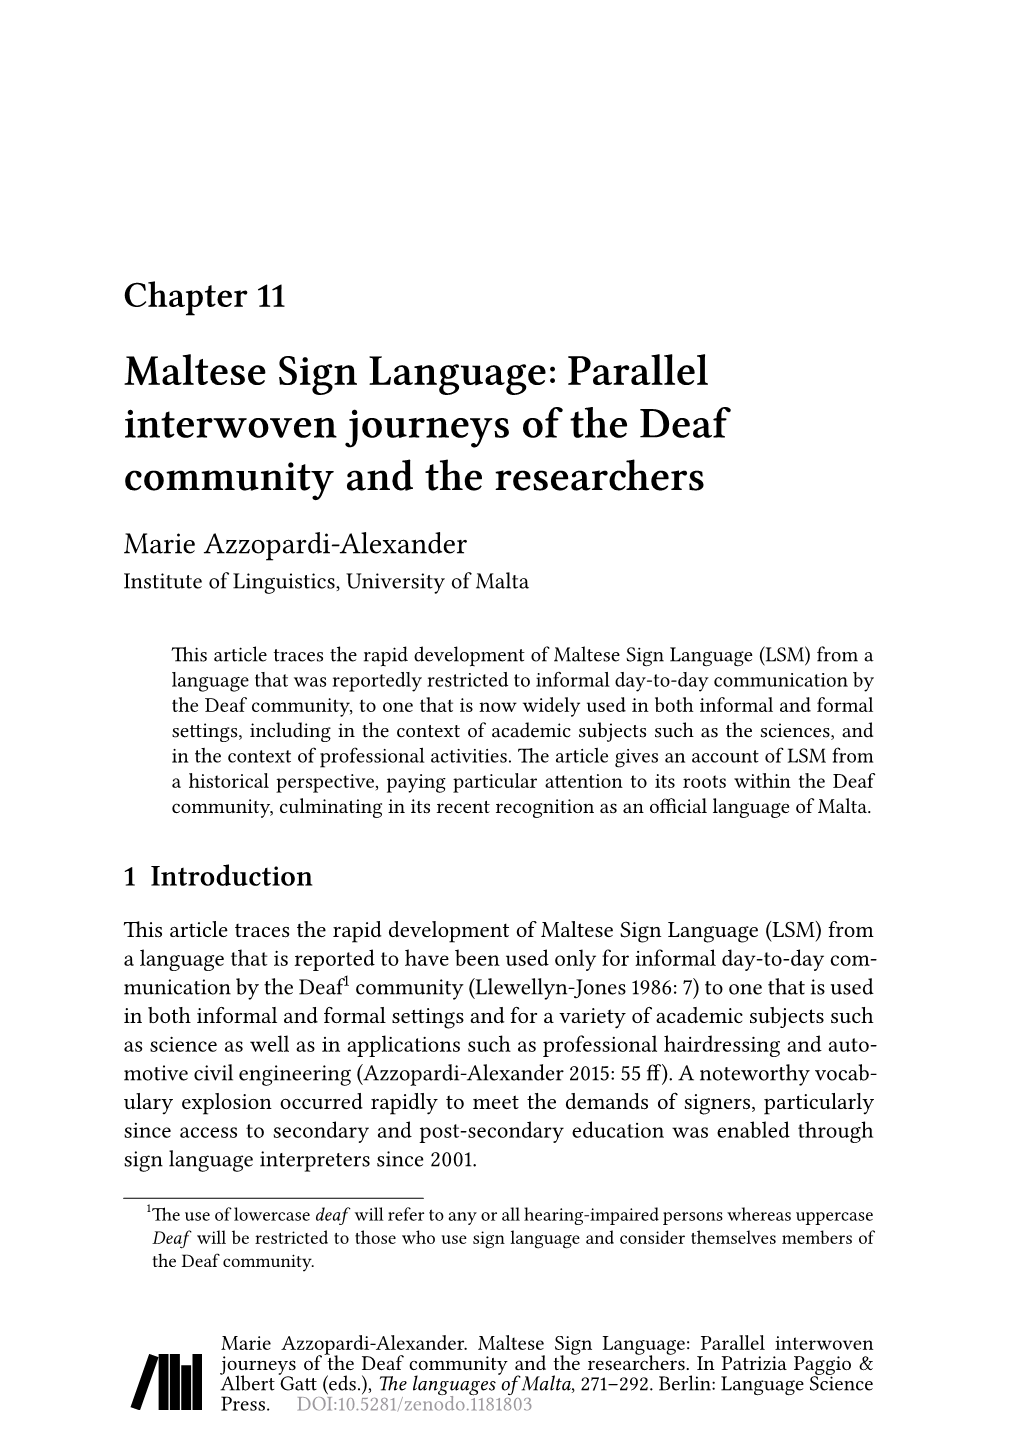 Maltese Sign Language: Parallel Interwoven Journeys of the Deaf Community and the Researchers Marie Azzopardi-Alexander Institute of Linguistics, University of Malta